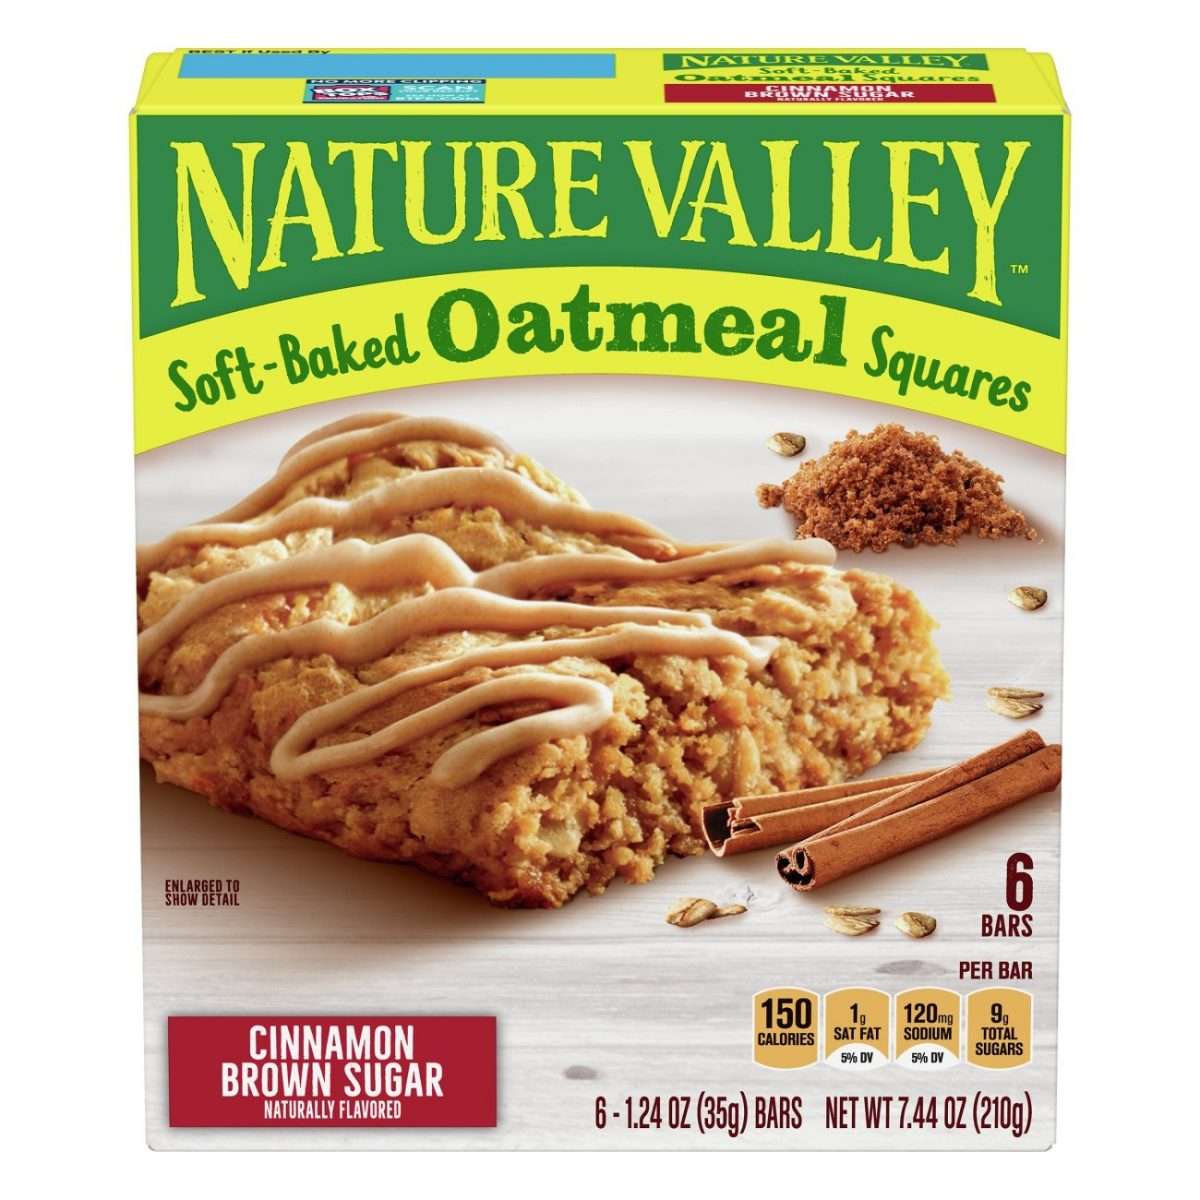 Nature Valley Soft